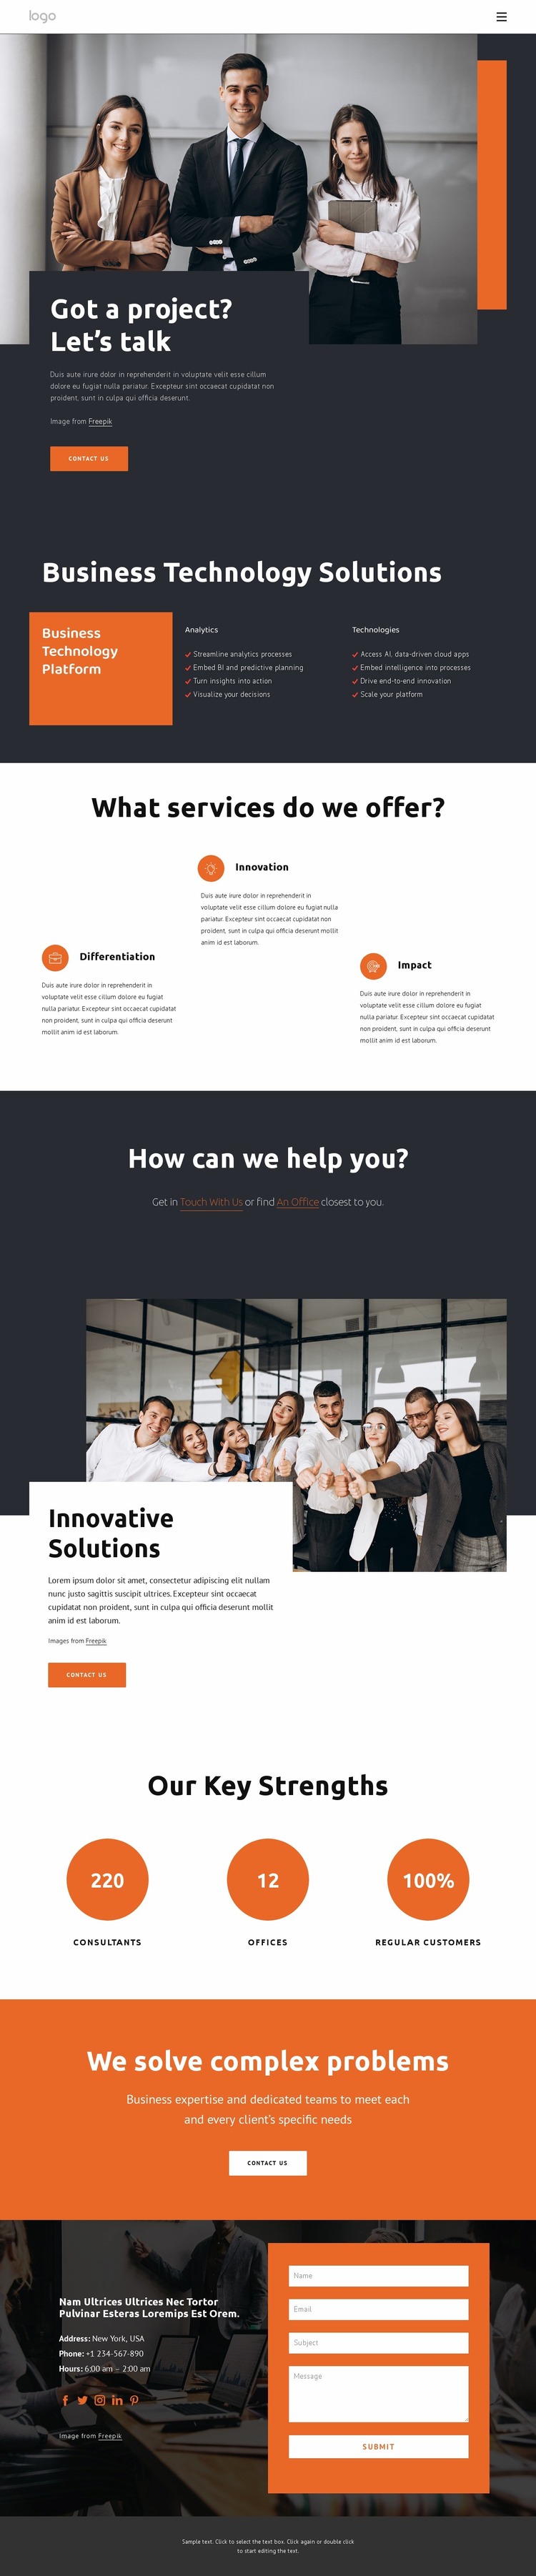 One of the best-known firms Website Mockup